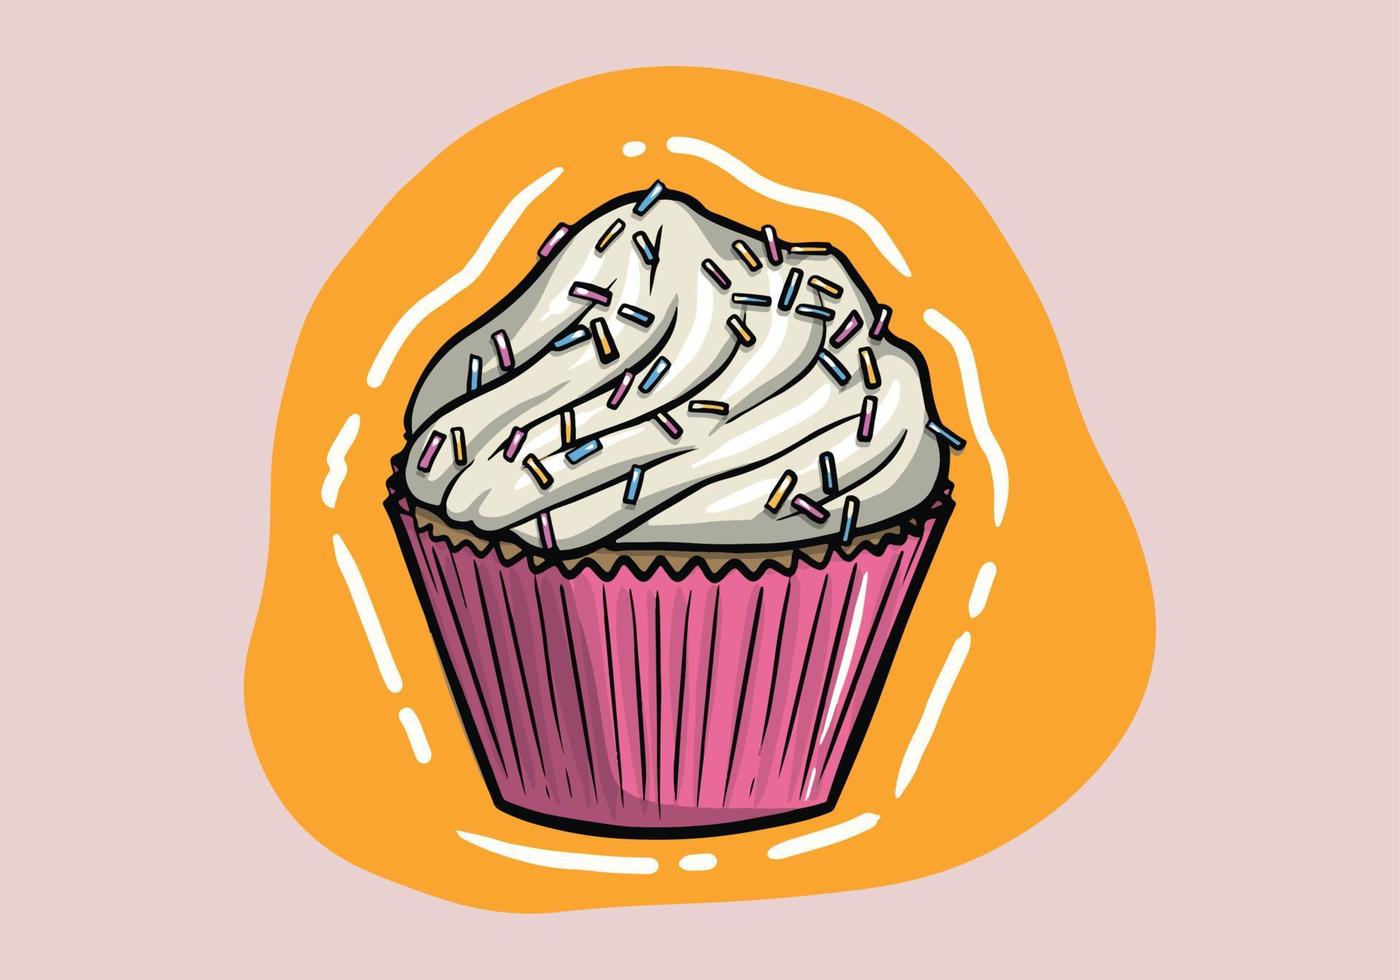 Vector of a sweet vanilla cupcake with frosting and sprinkles on the top. Hand drawn cupcake